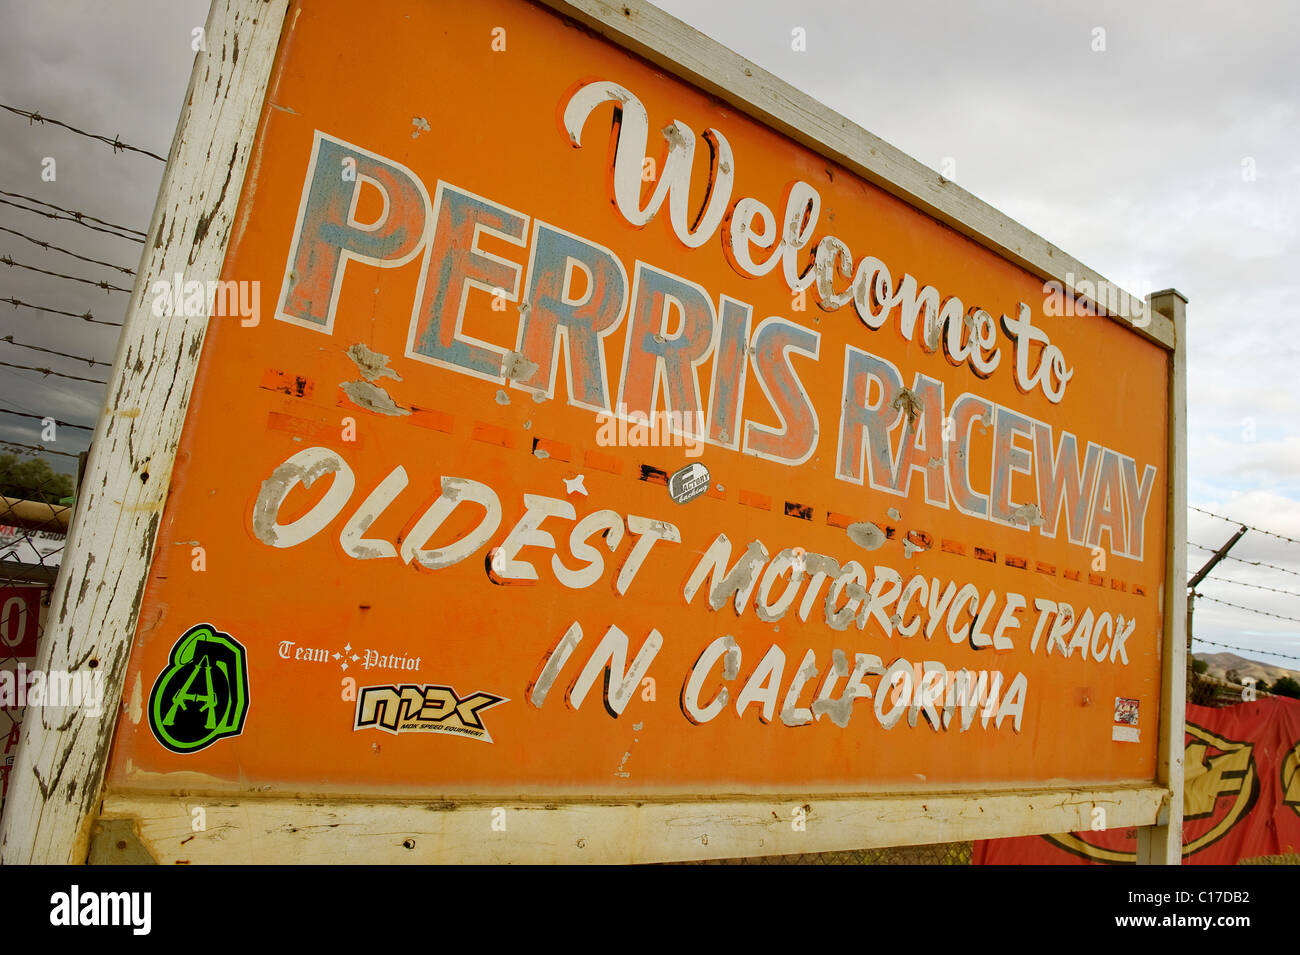 retro faded shabby signpost for perris raceway oldest motorcycle track in california usa Stock Photo